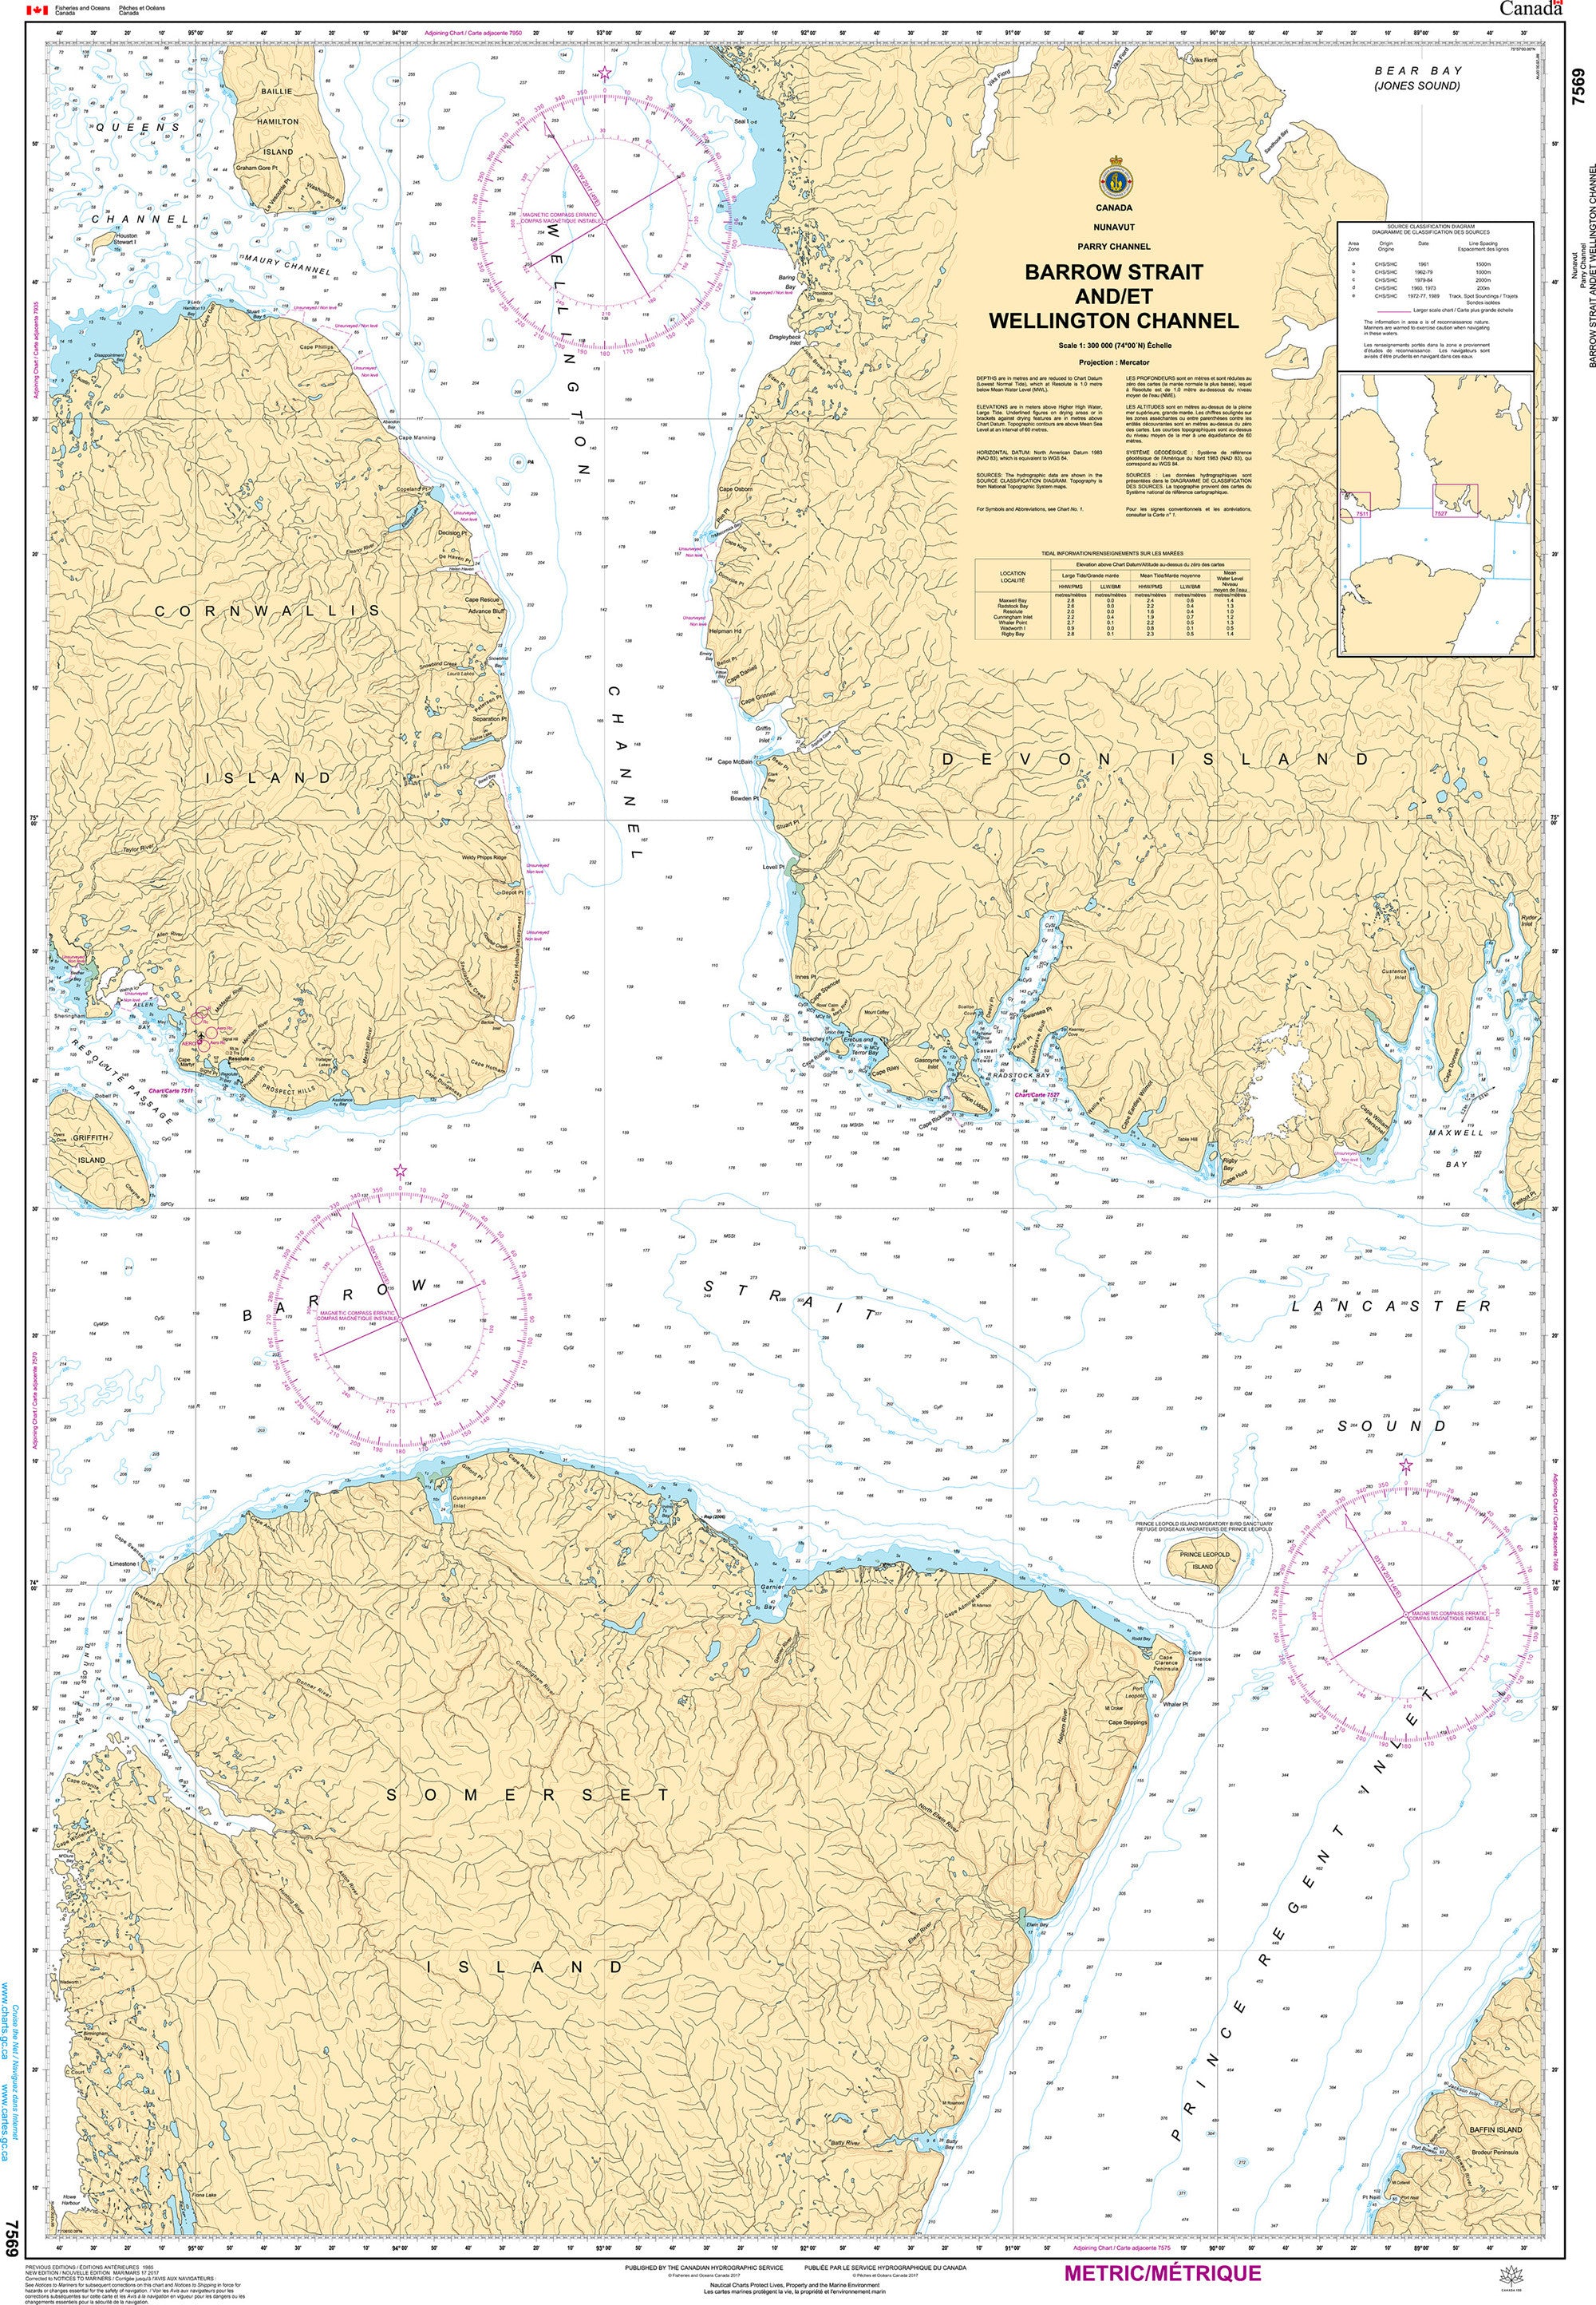 Canadian Hydrographic Service Nautical Chart CHS7569: Barrow Strait and/et Wellington Channel